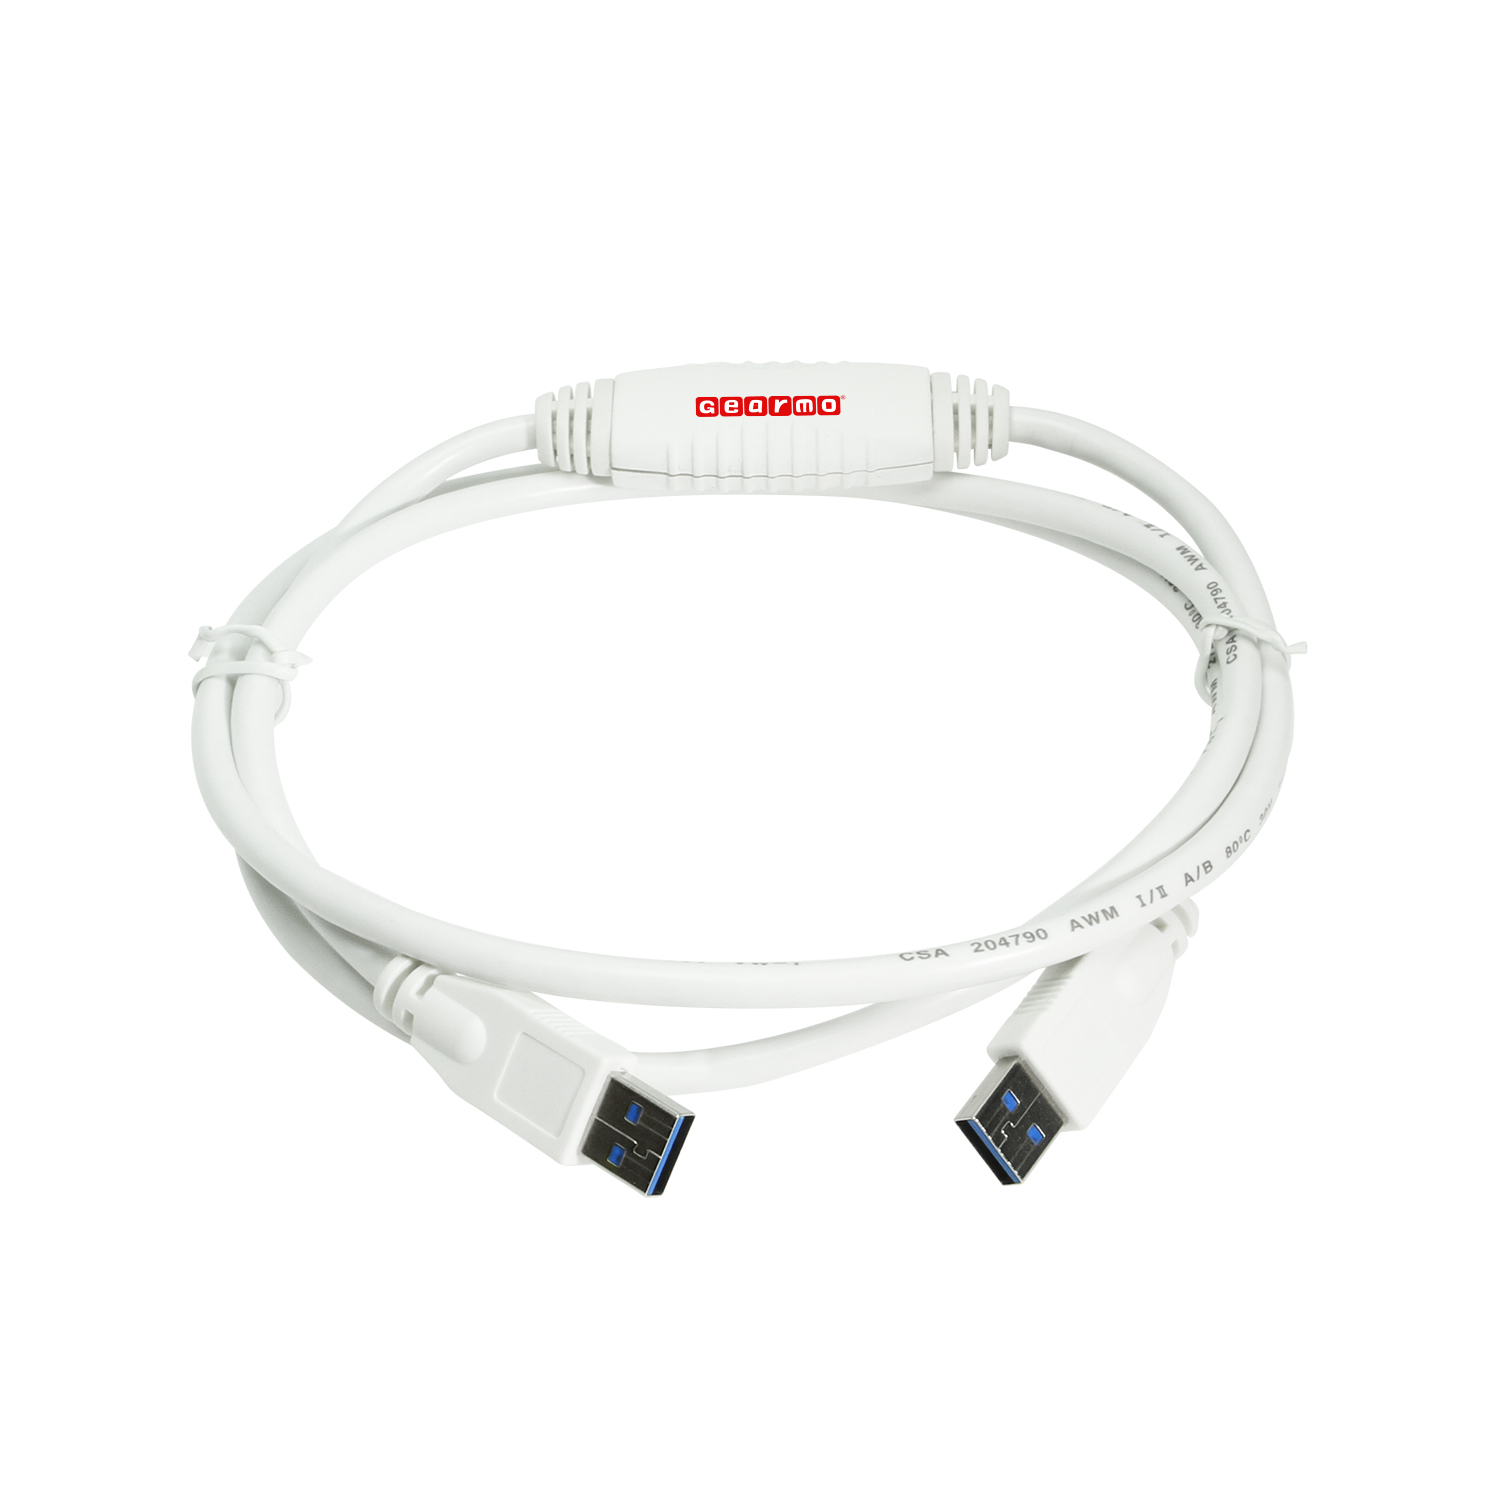 USB 3.0 Data Transfer Cable for